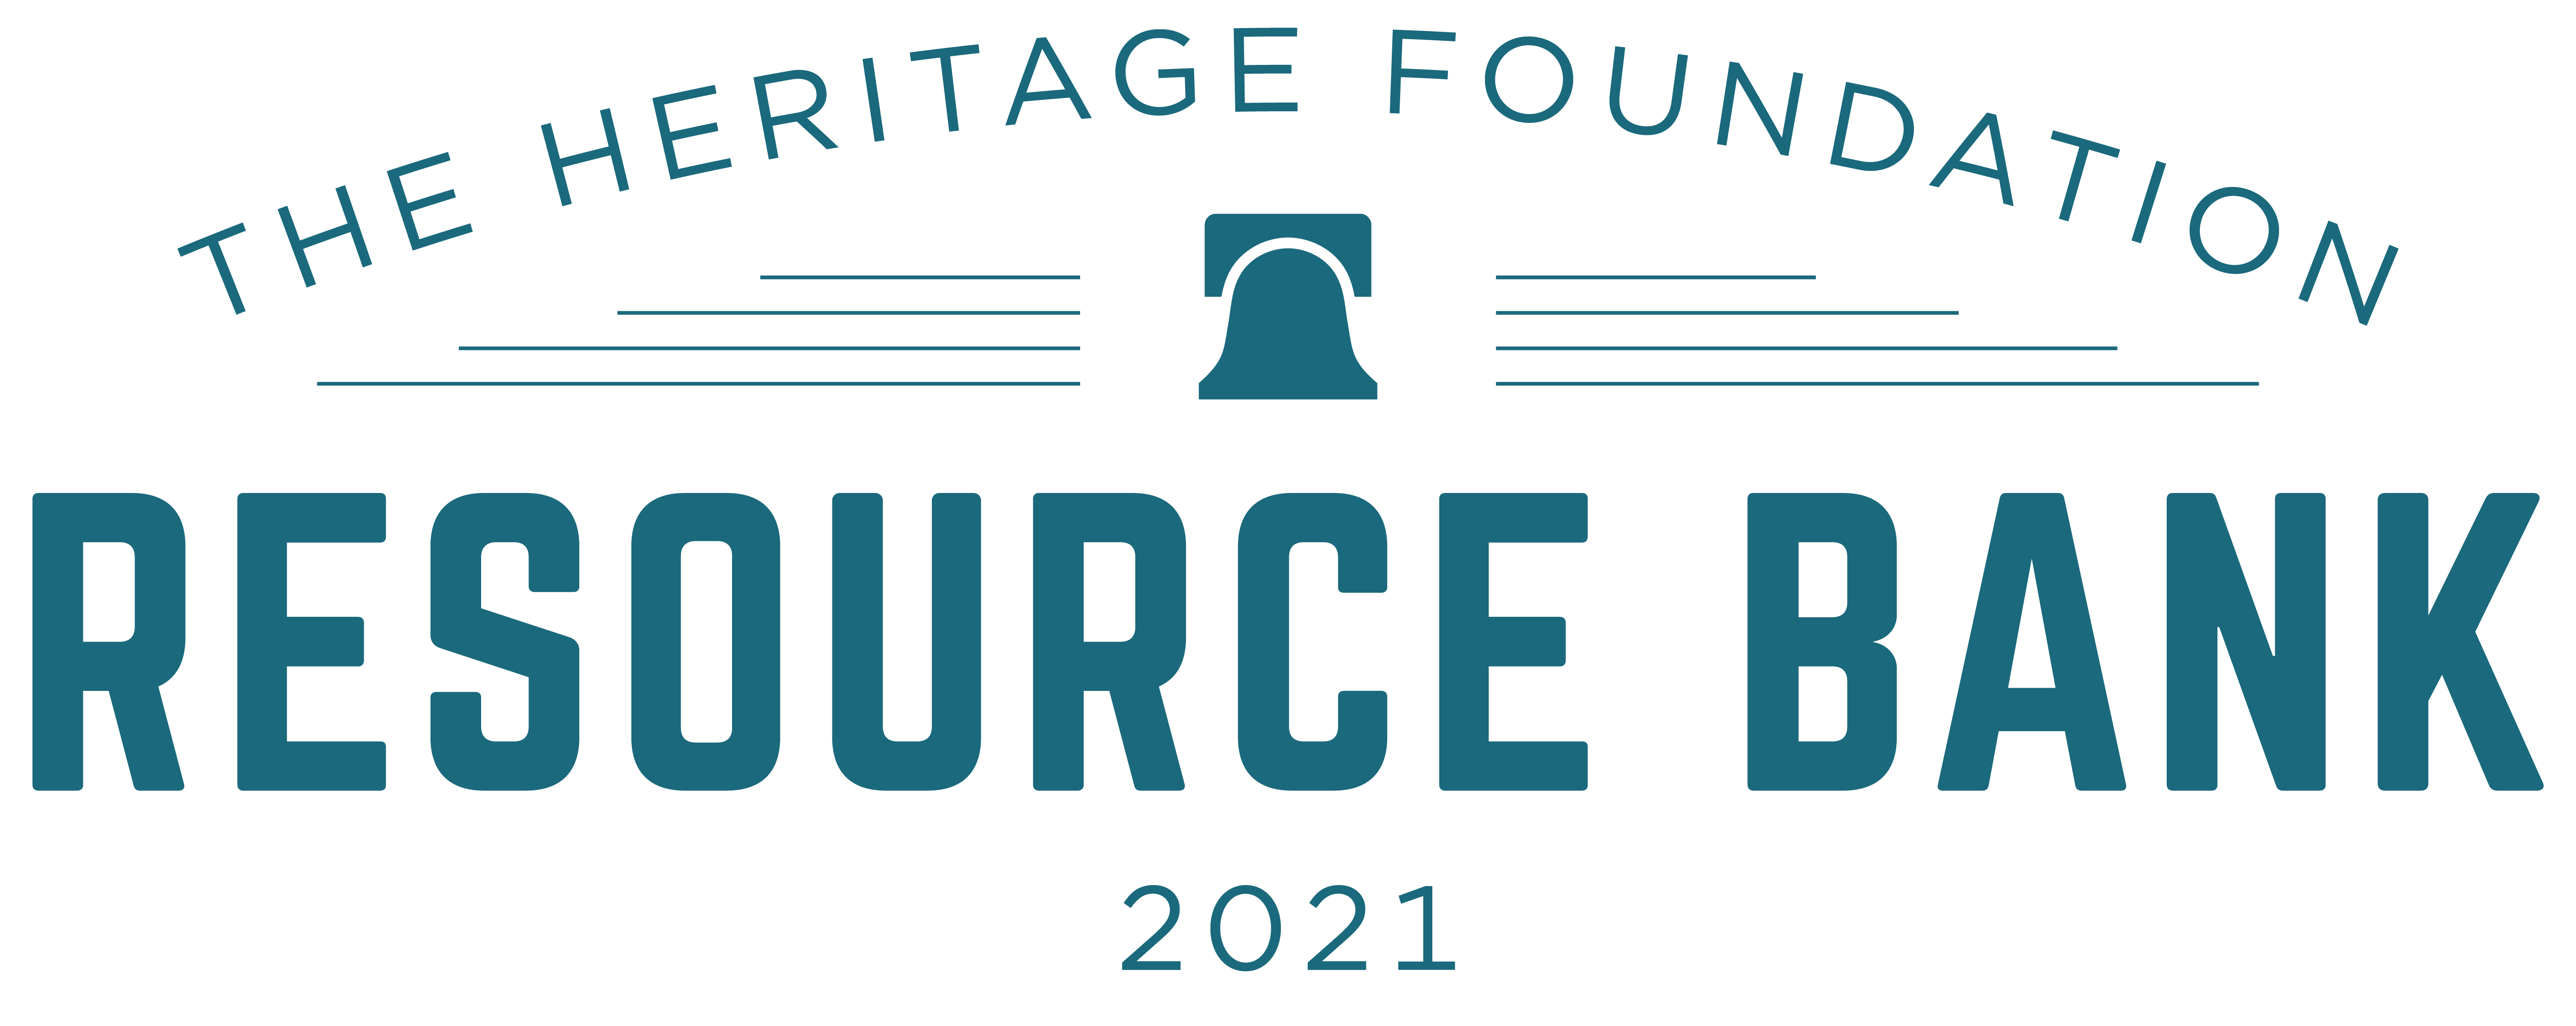 The Heritage Foundation Resource Bank 2021